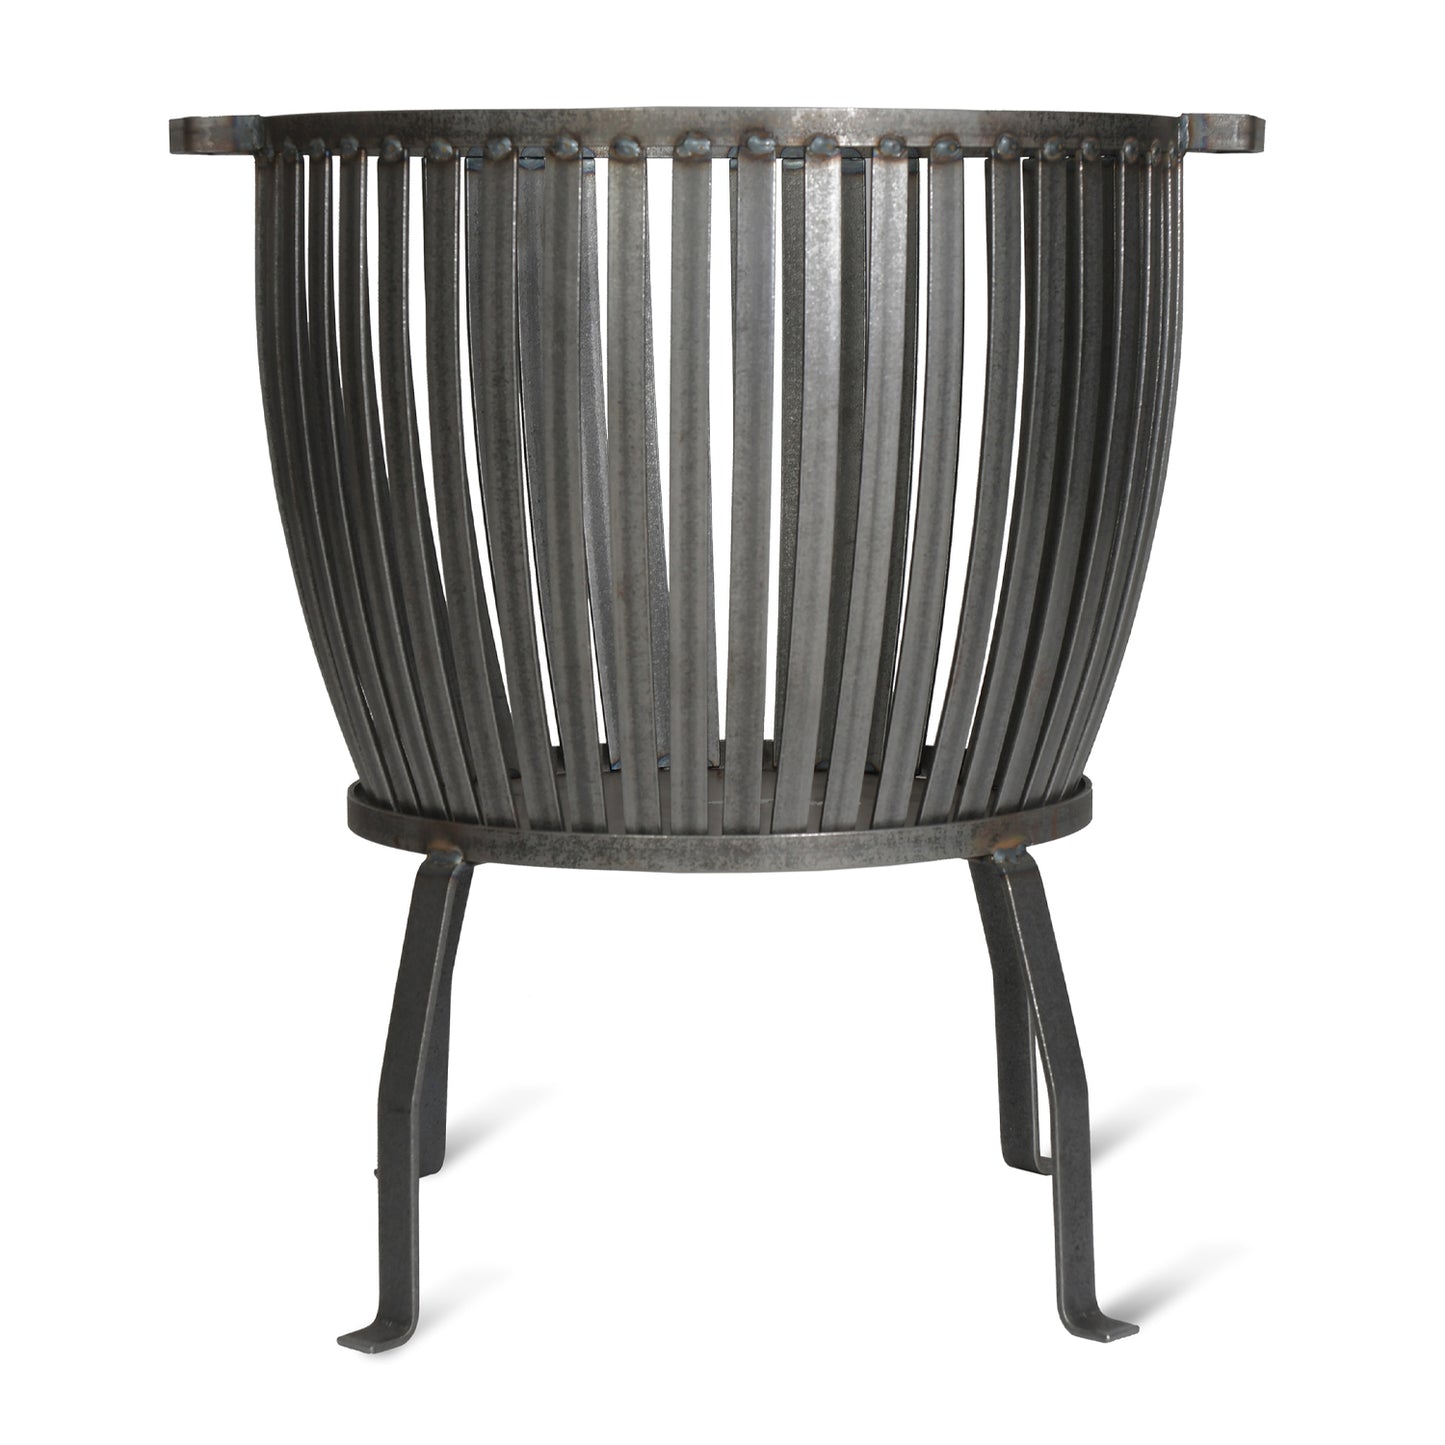 Barrington Fire Pit Large Steel by Garden Trading